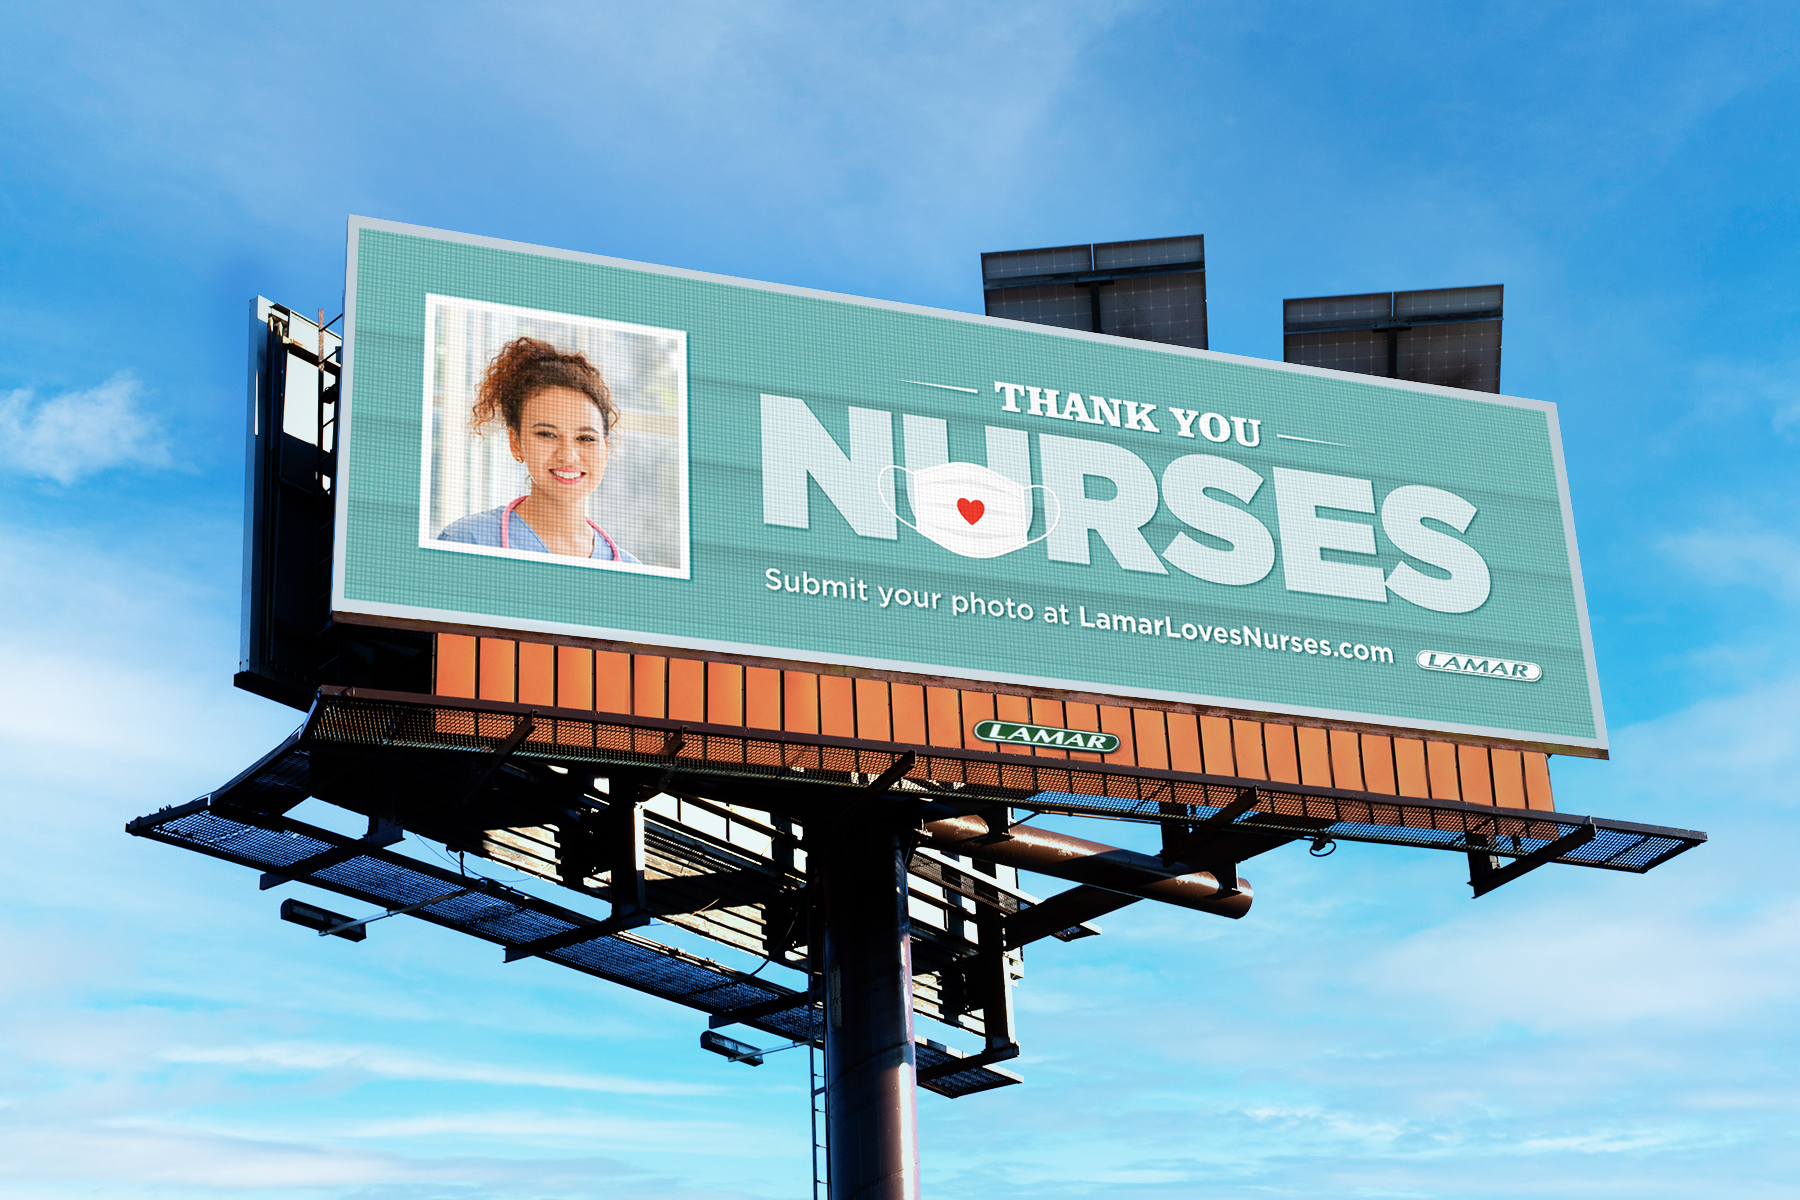 Lamar will feature nurses’ names and photos on digital billboards for National Nurses Week (May 6-12)